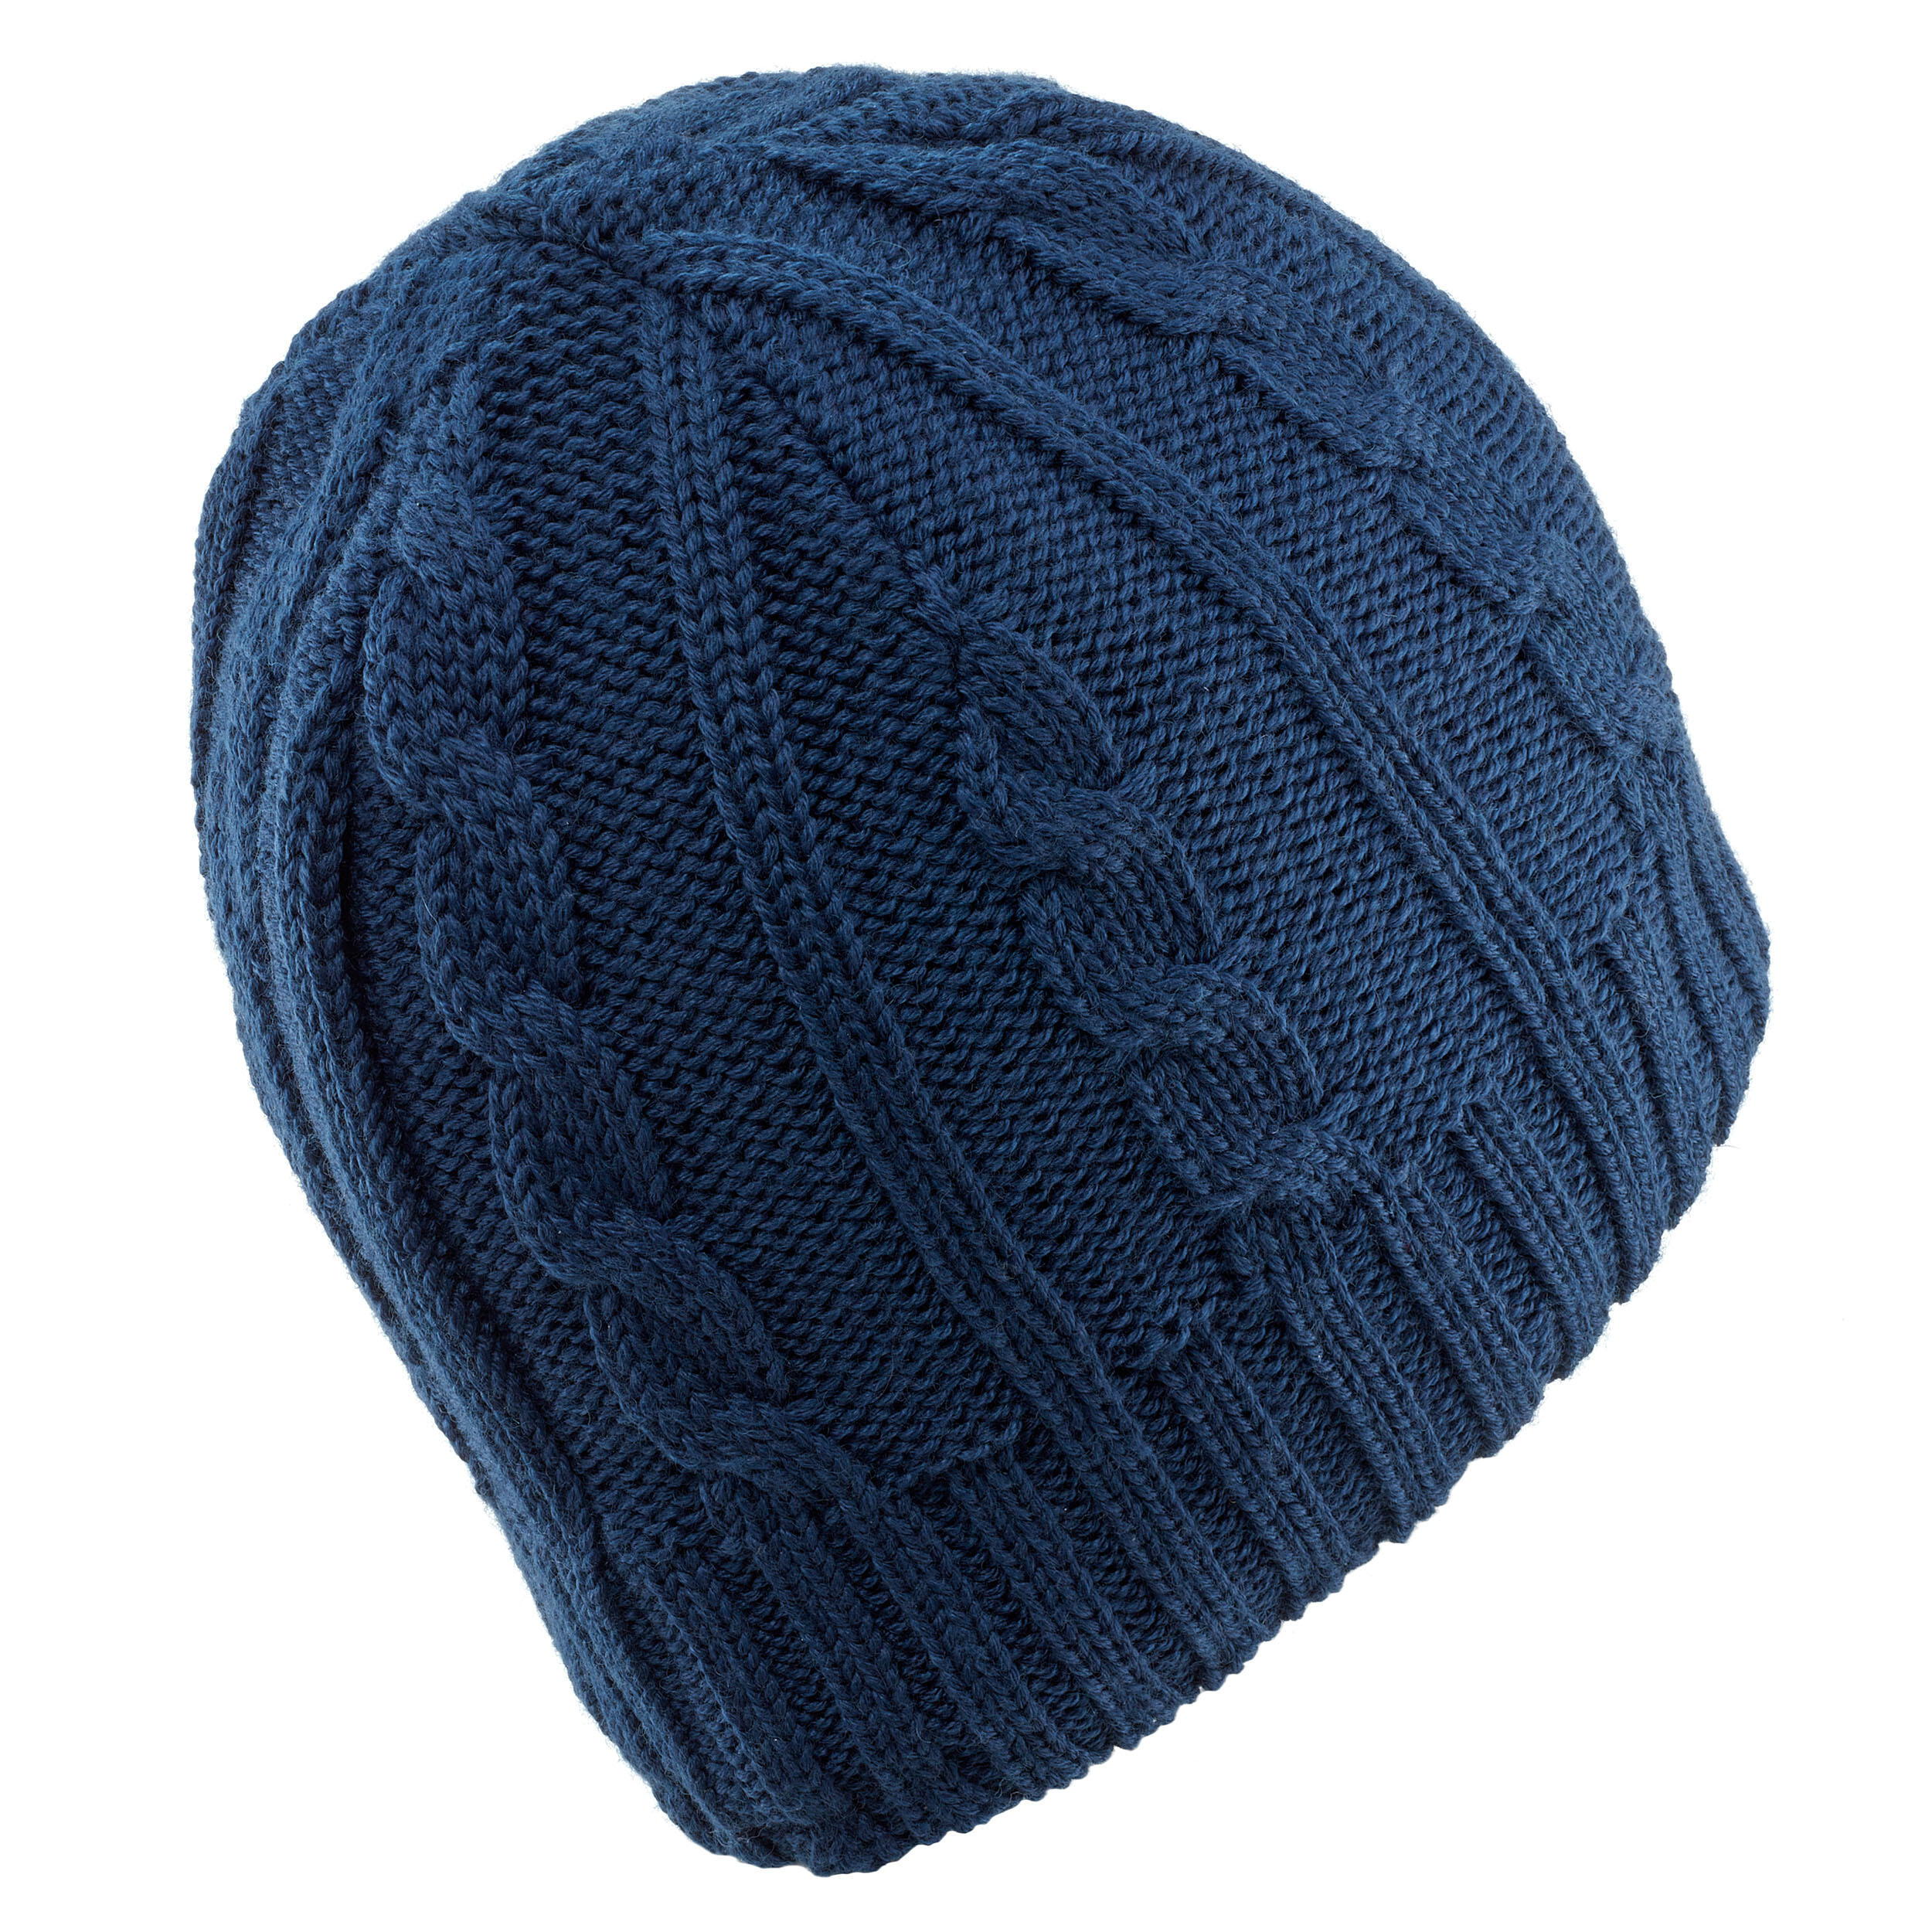 Cable-knit ski hat - Kids - WEDZE